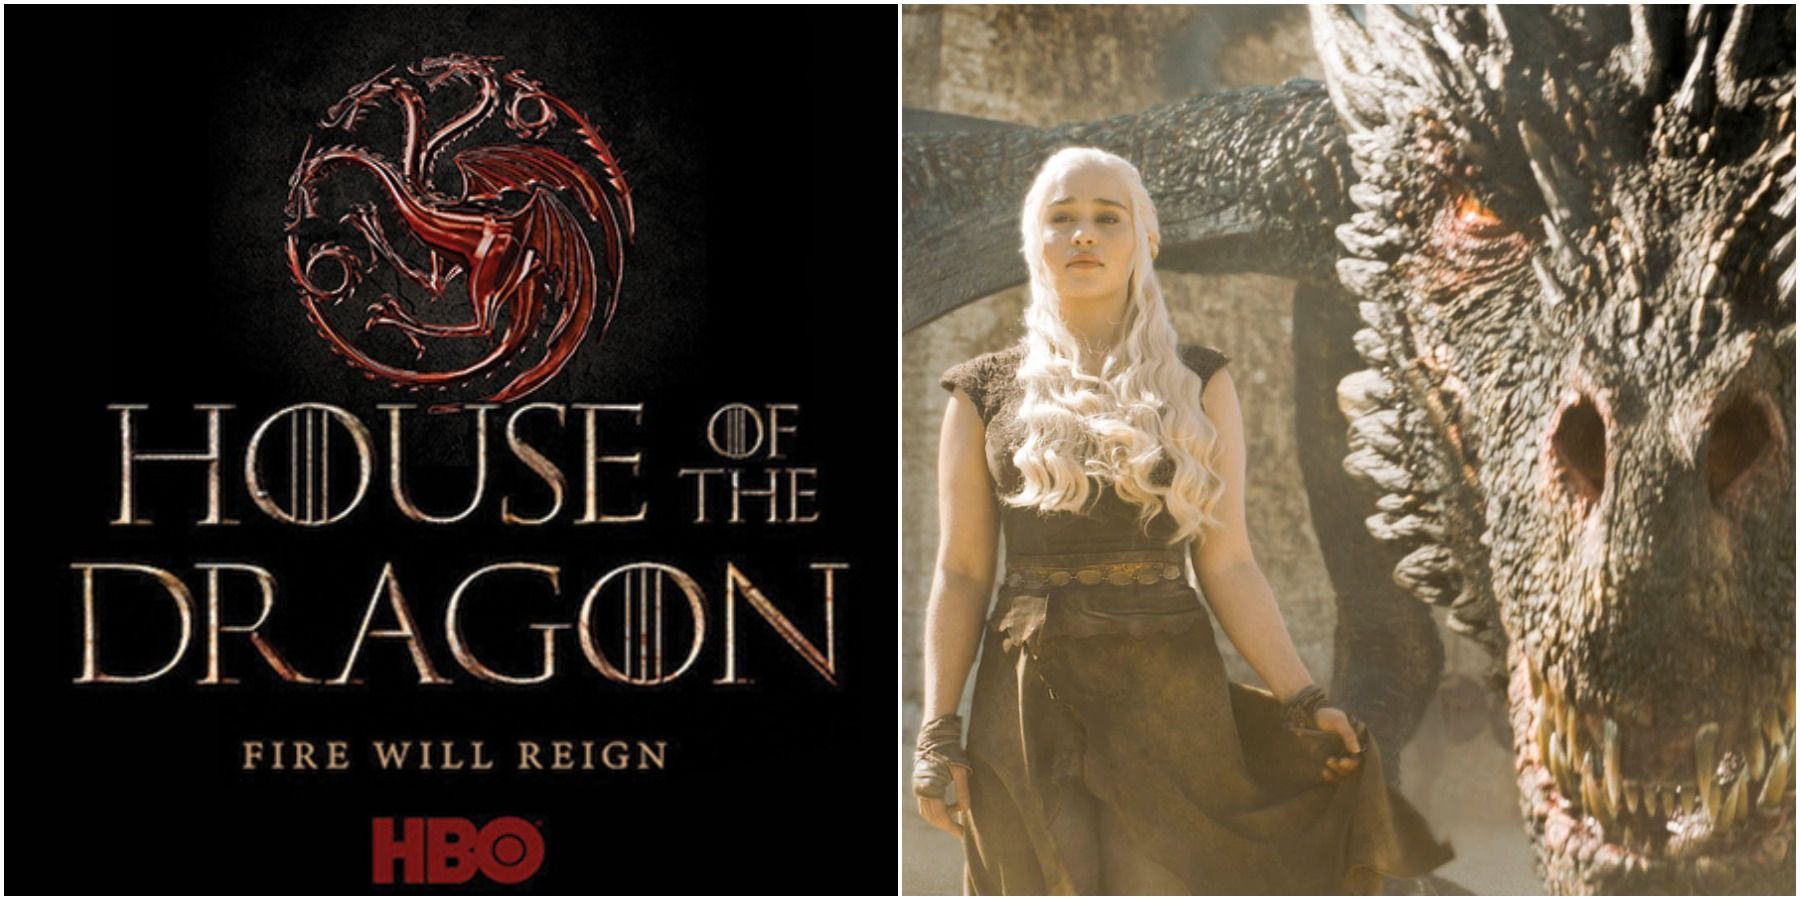 Teaser poster for HBO's House of the Dragon and a still of Emilia Clarke as Daenerys Targaryen with Drogon from Game of Thrones